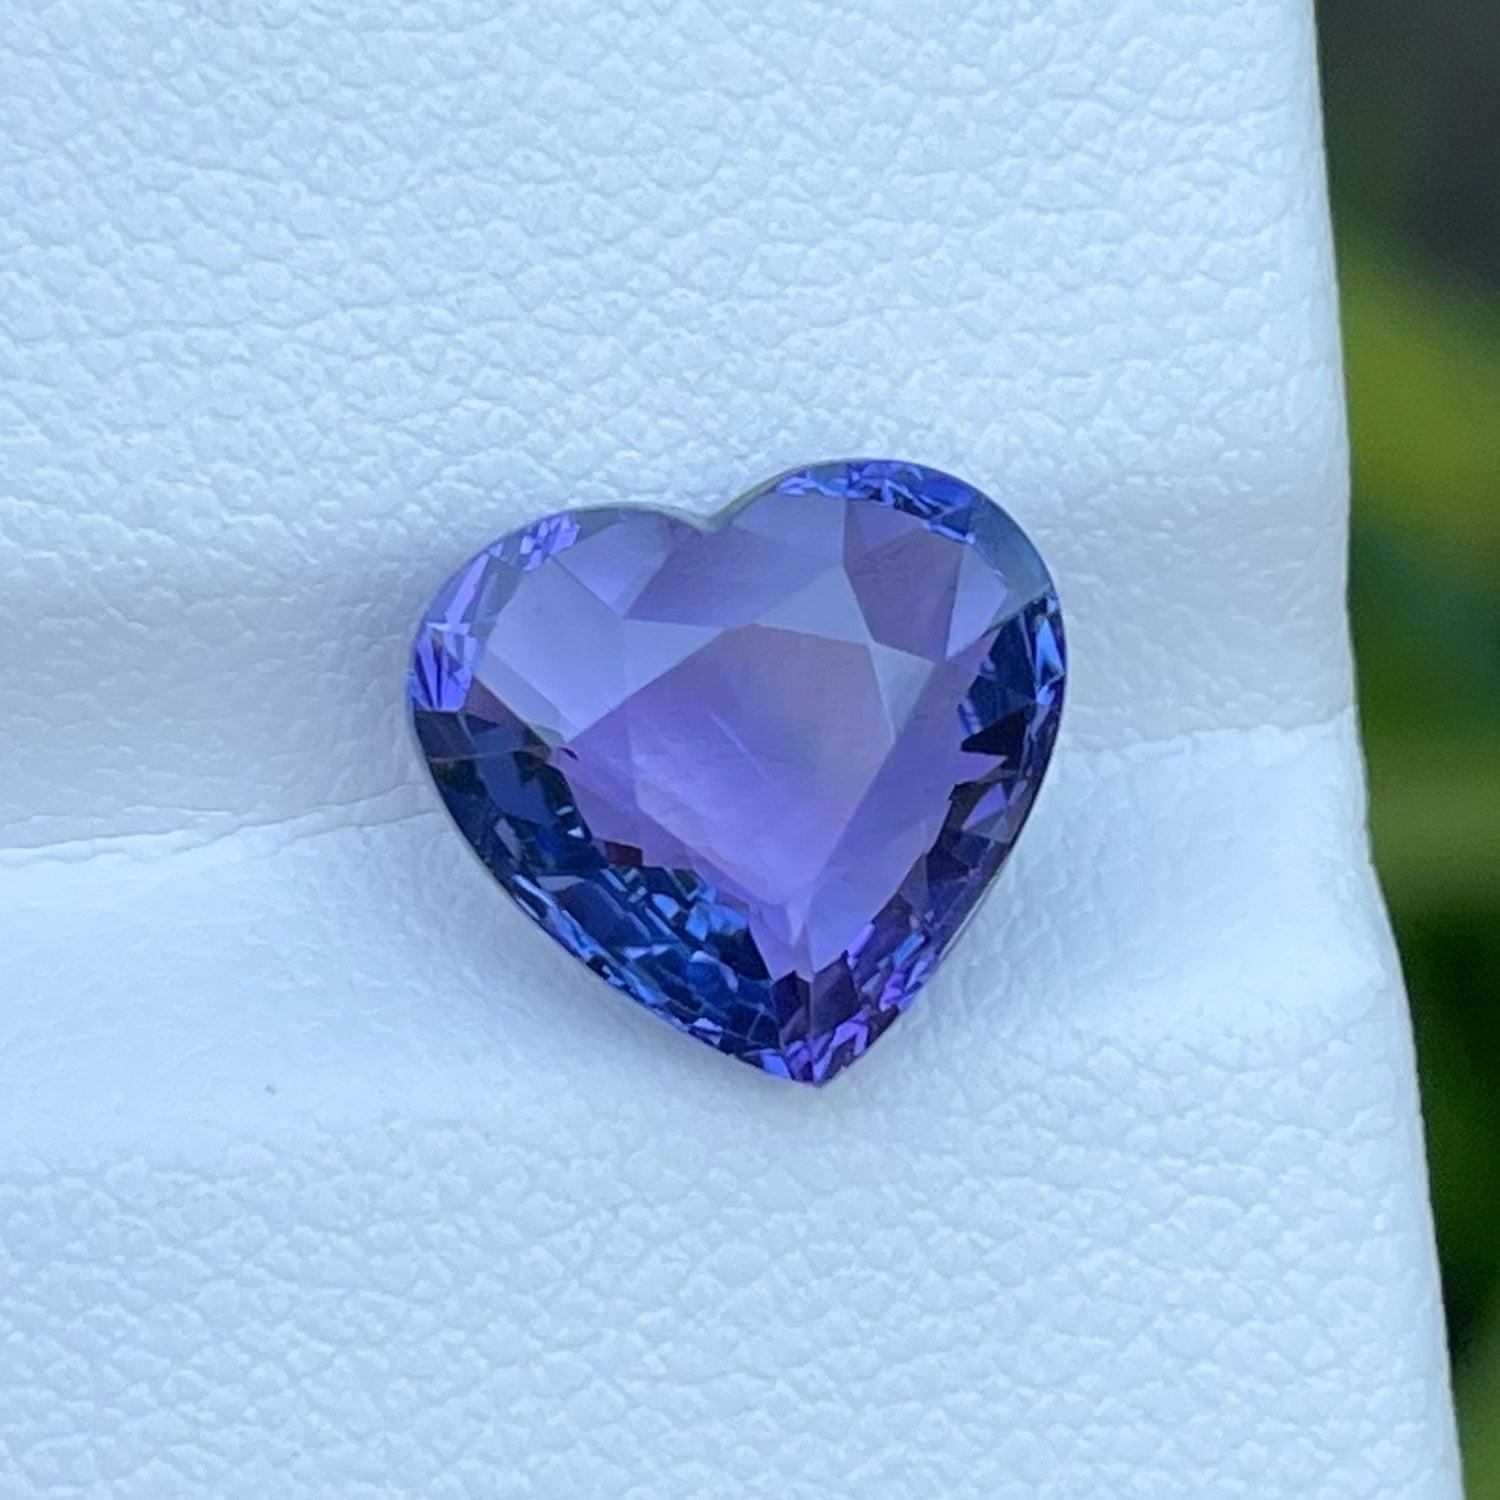 Gorgeous Heart Shaped Loose Tanzanite of 4.29 Carat from Tanzania has a wonderful cut in a Heart shape, incredible Blue color. Great brilliance. This gem is totally Eye Clean Clarity.

Product Information:
GEMSTONE TYPE:	Gorgeous Heart Shaped Loose